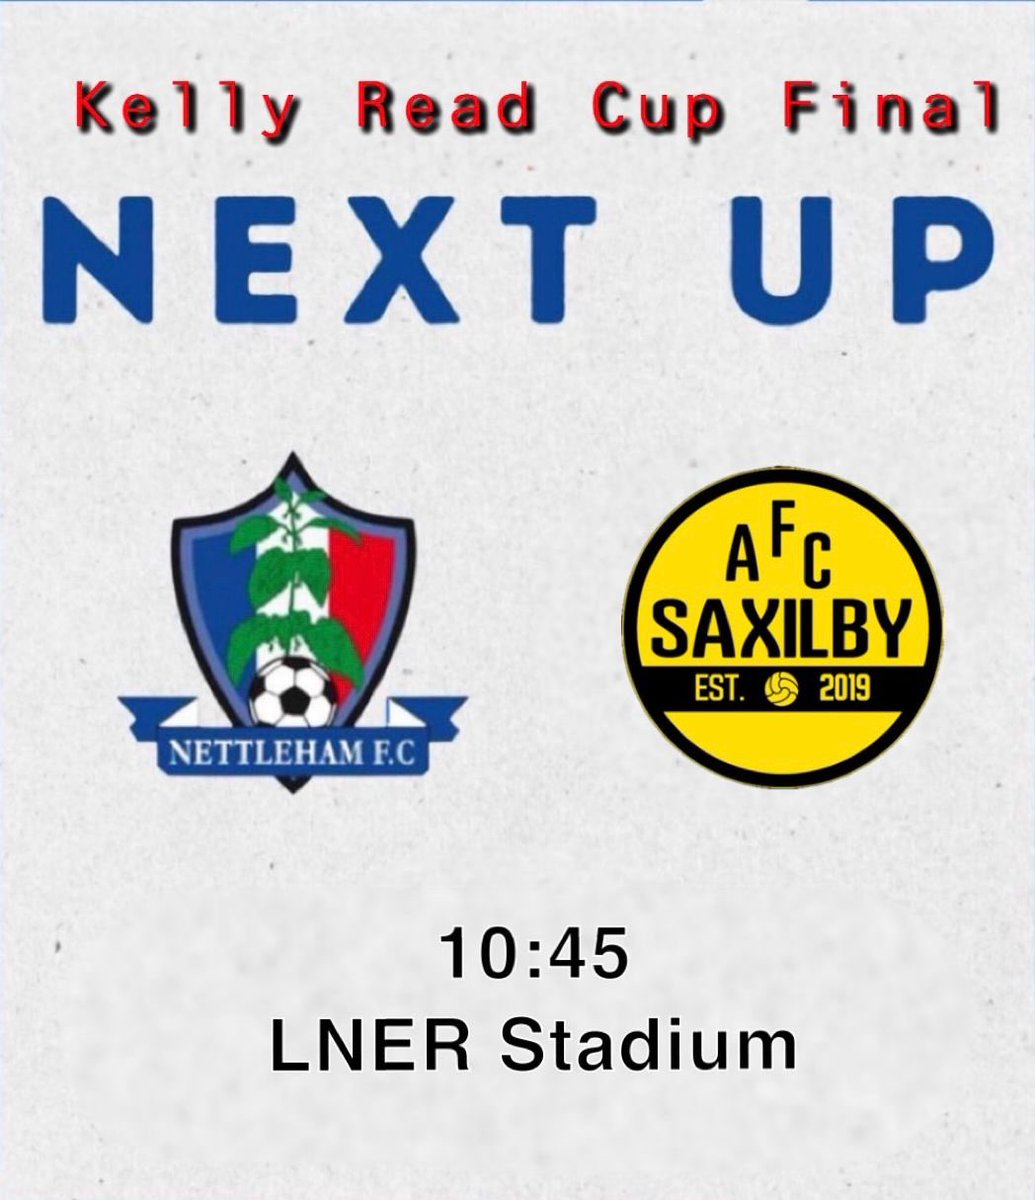 CUP FINAL WEEK 👀

The lads are making the long awaited journey to Sincil Bank this Sunday. 

We face AFC Saxilby in the Kelly Read Cup. 

We would love as much support as we can get! 

£8 cash entry (bargain), 10:45 kick off 

🍖🍖🍖